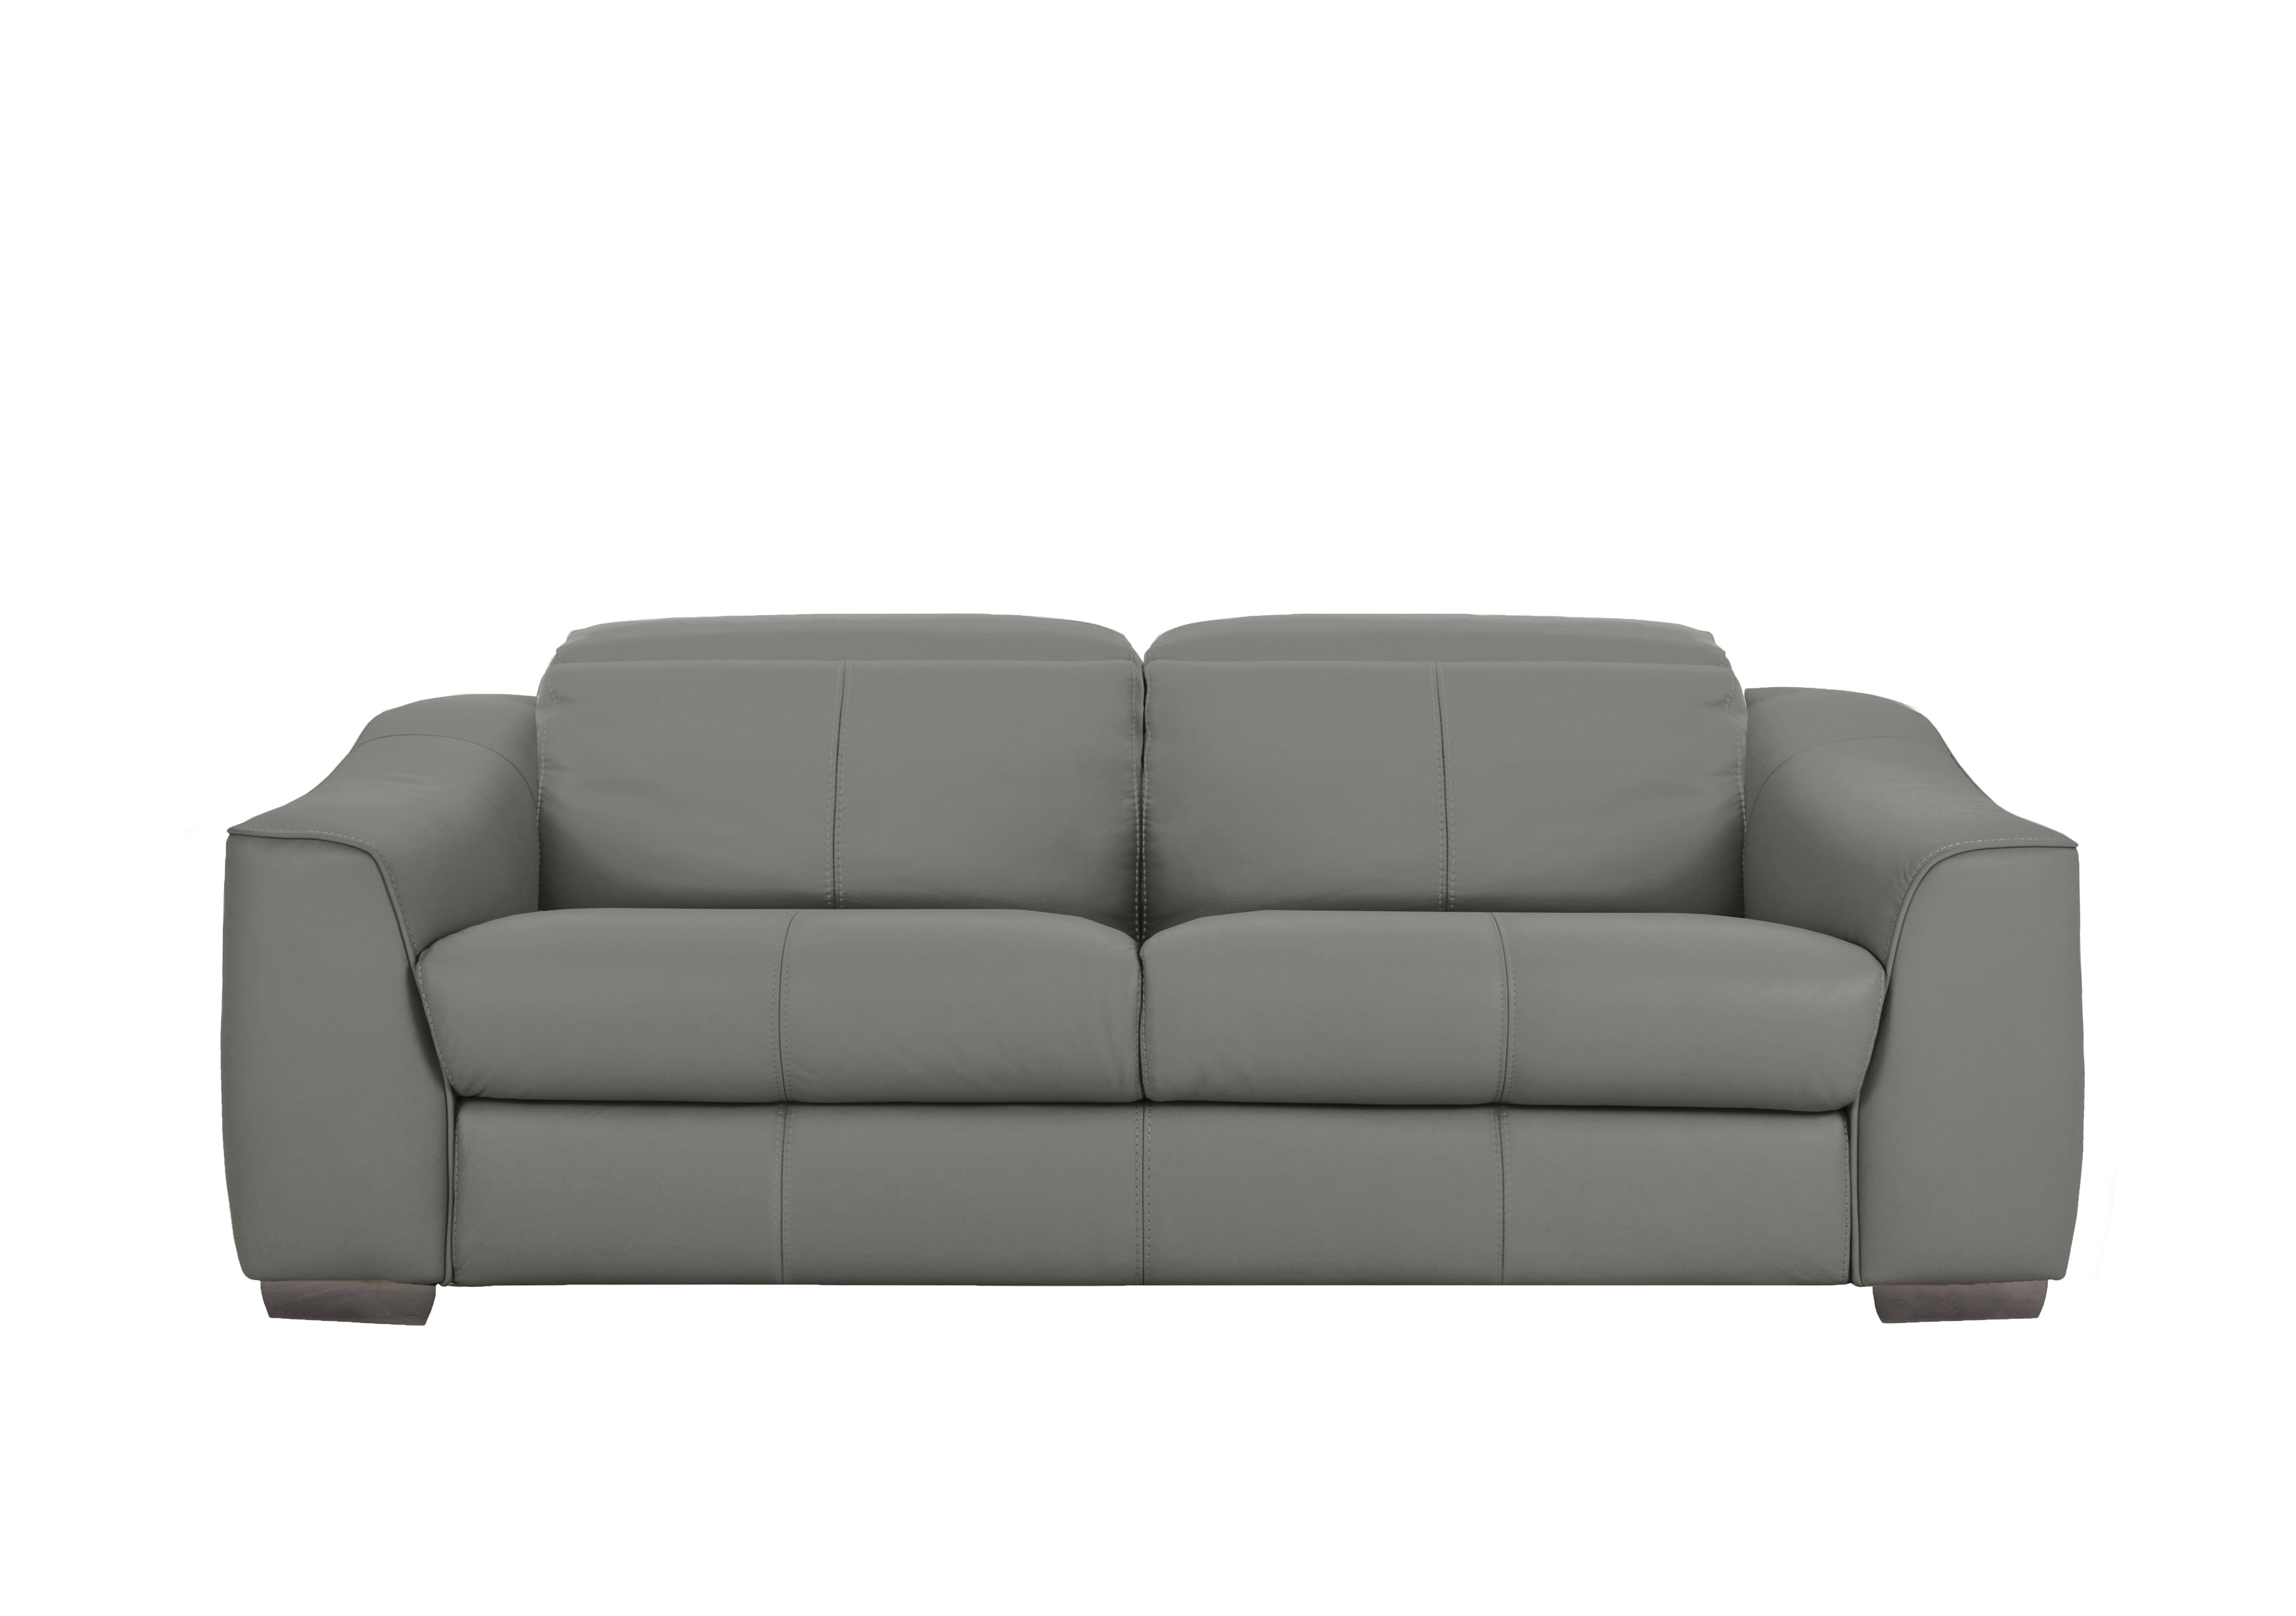 Xavier 3 Seater Leather Sofa in Nc-088e Charcoal Grey on Furniture Village